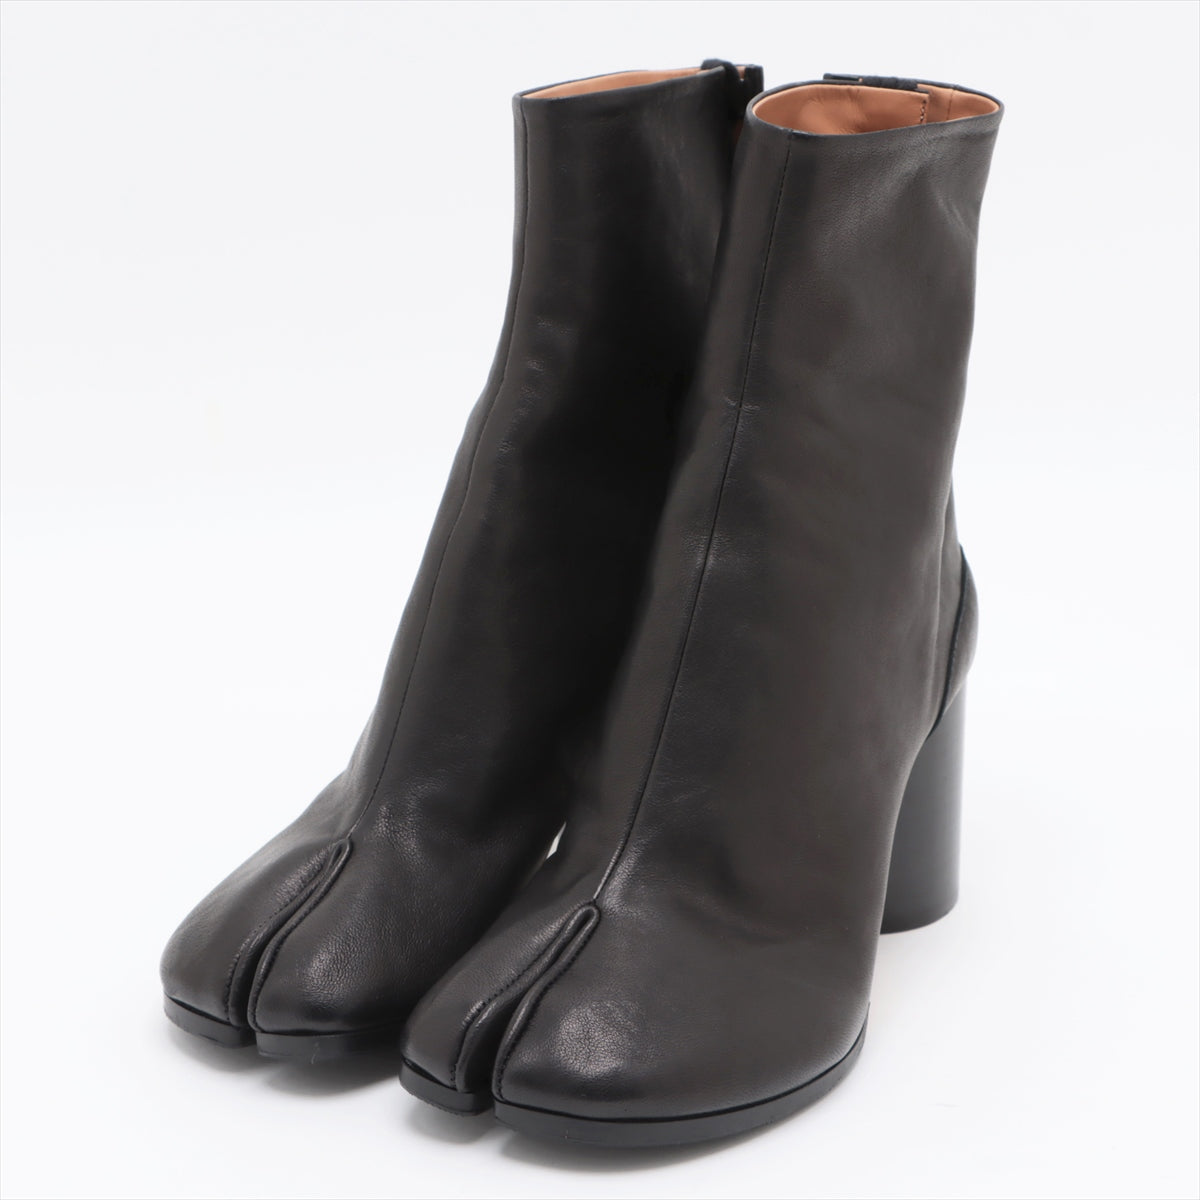 Maison Margiela TABI Leather Short Boots 36 Ladies' Black 22  box There is a bag